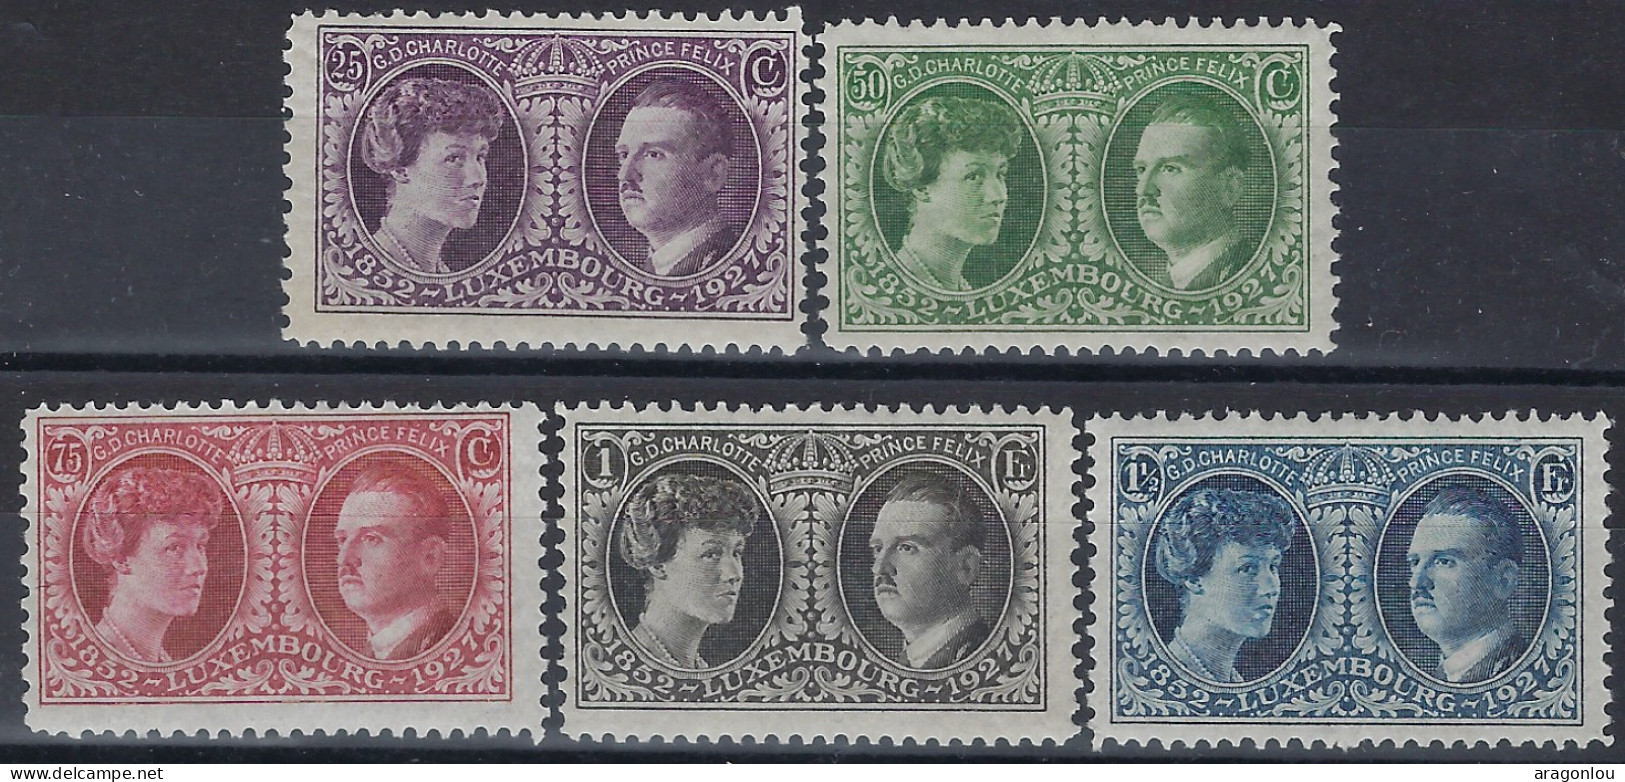 Luxembourg - Luxemburg - Timbre   1927   Couple Grand-Ducal   Série  VC. 20,-  MNH** - Blocks & Sheetlets & Panes